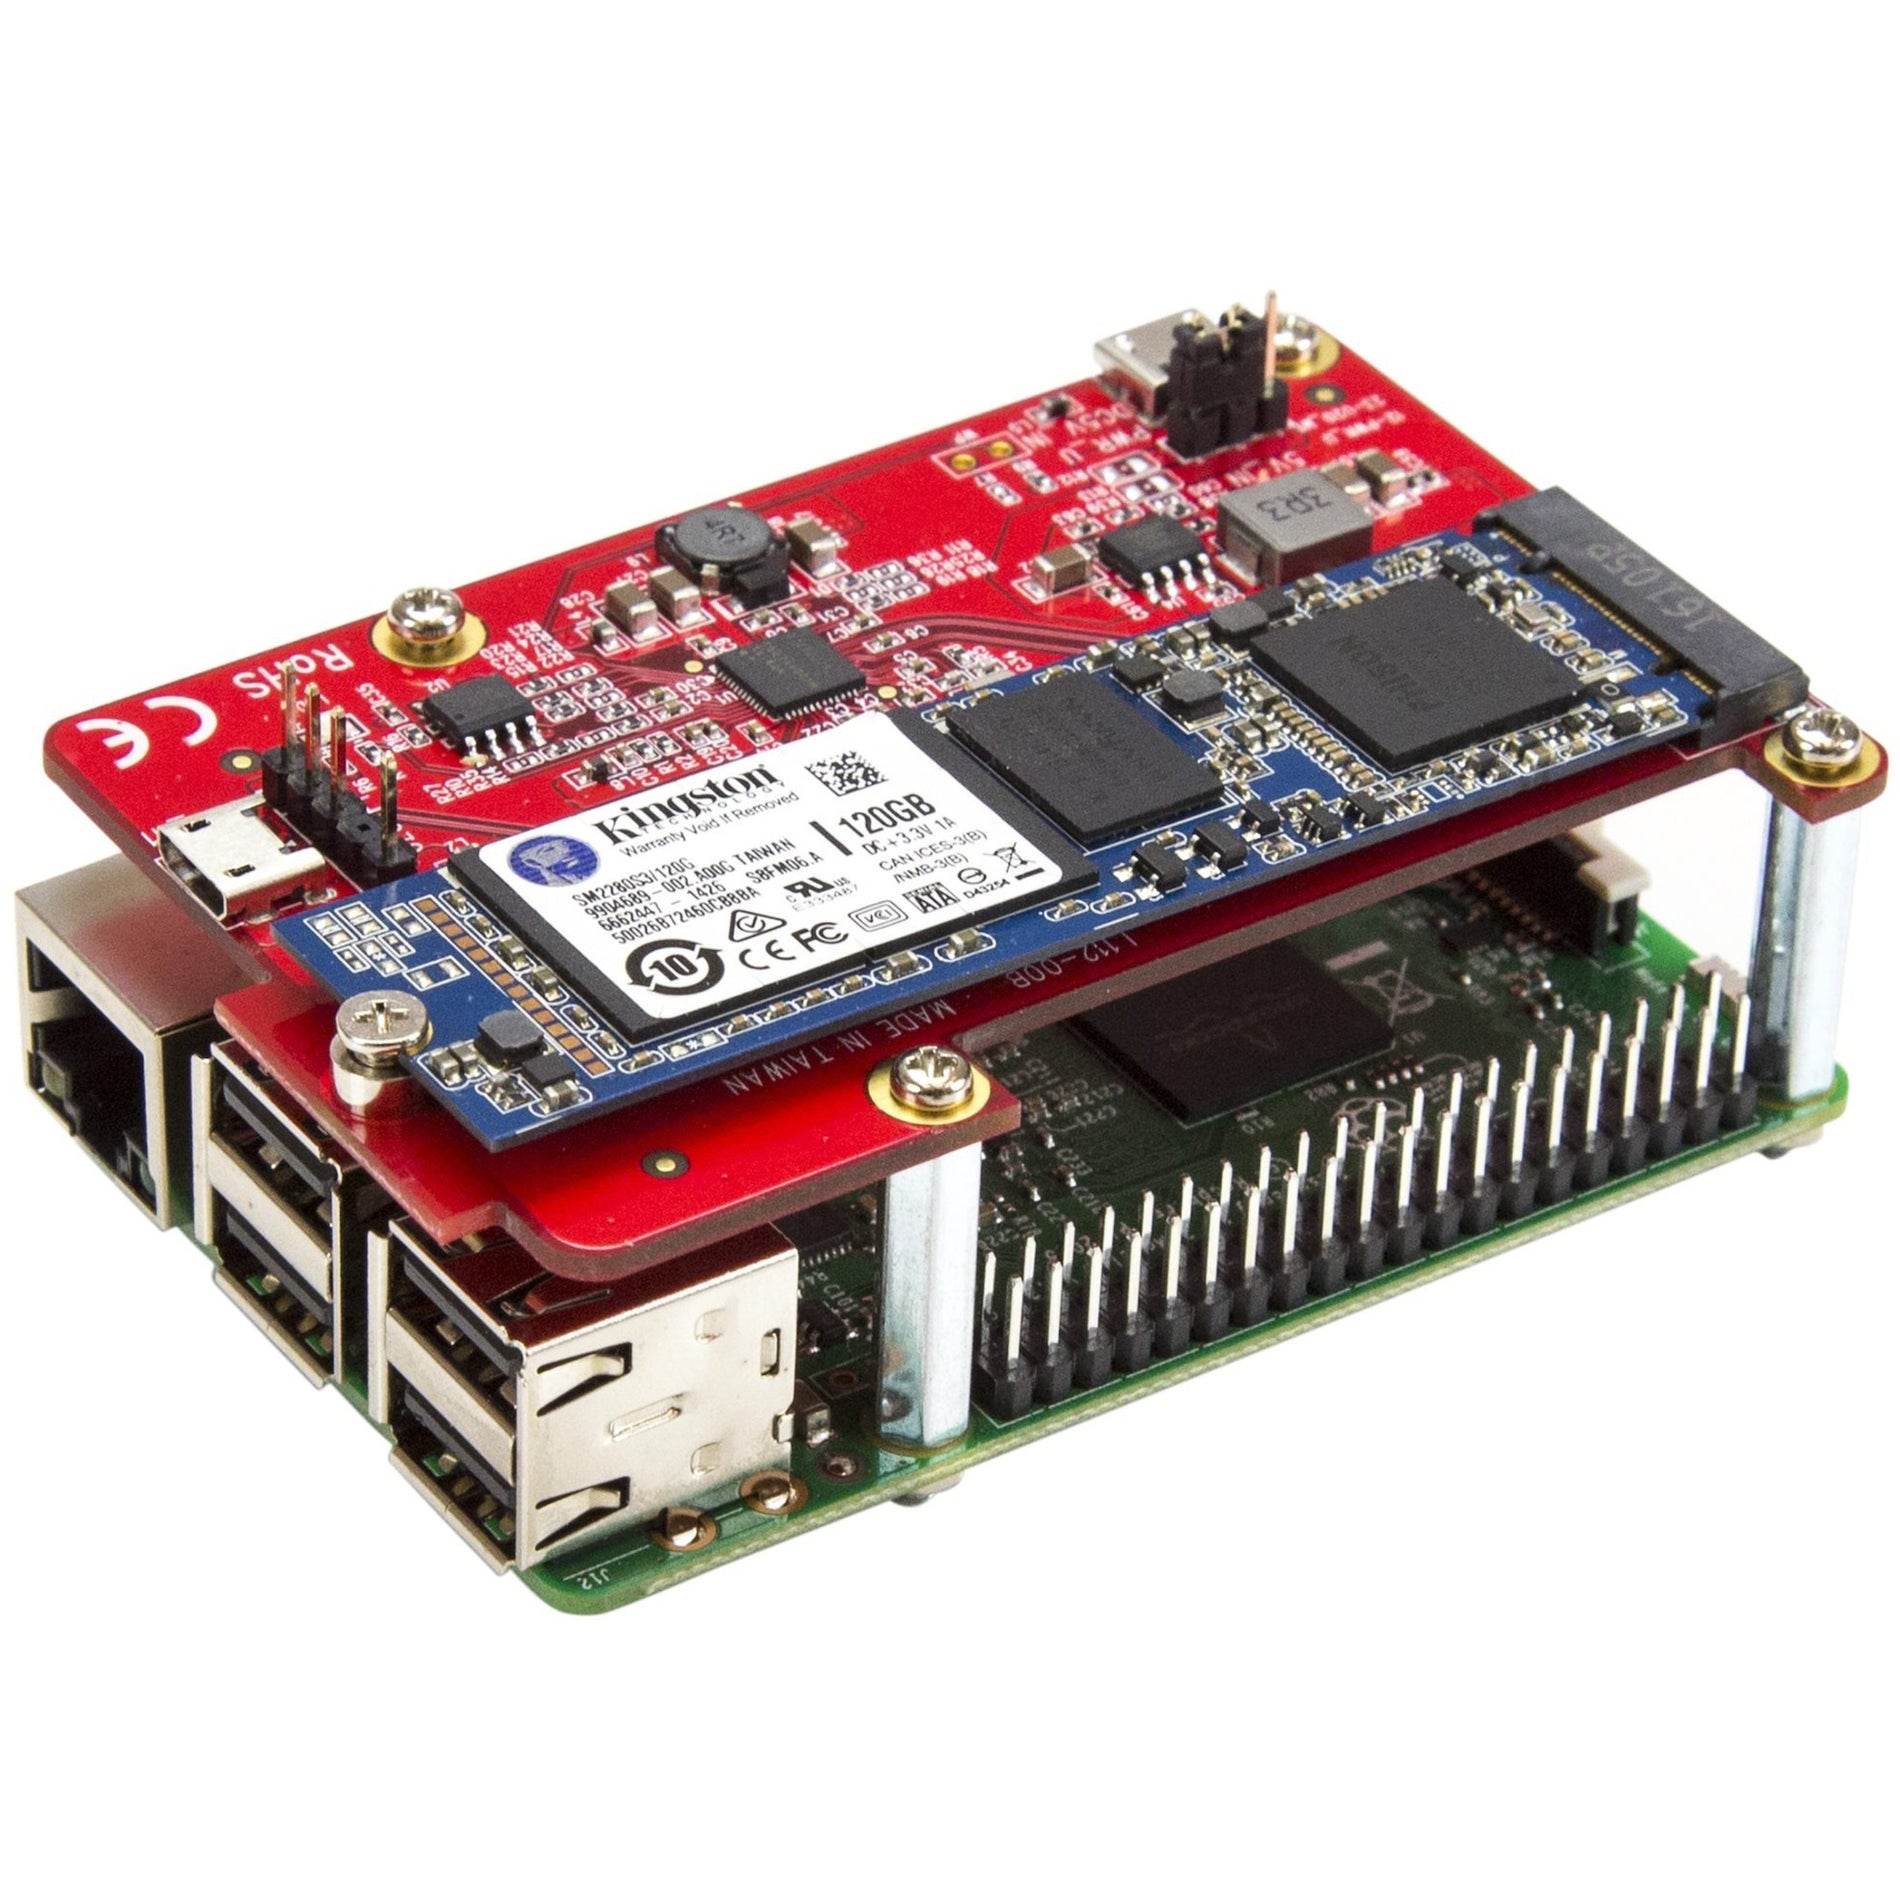 StarTech.com PIB2M21 USB to M.2 SATA Converter for Raspberry Pi and Development Boards, Easy SSD Connection and Data Transfer